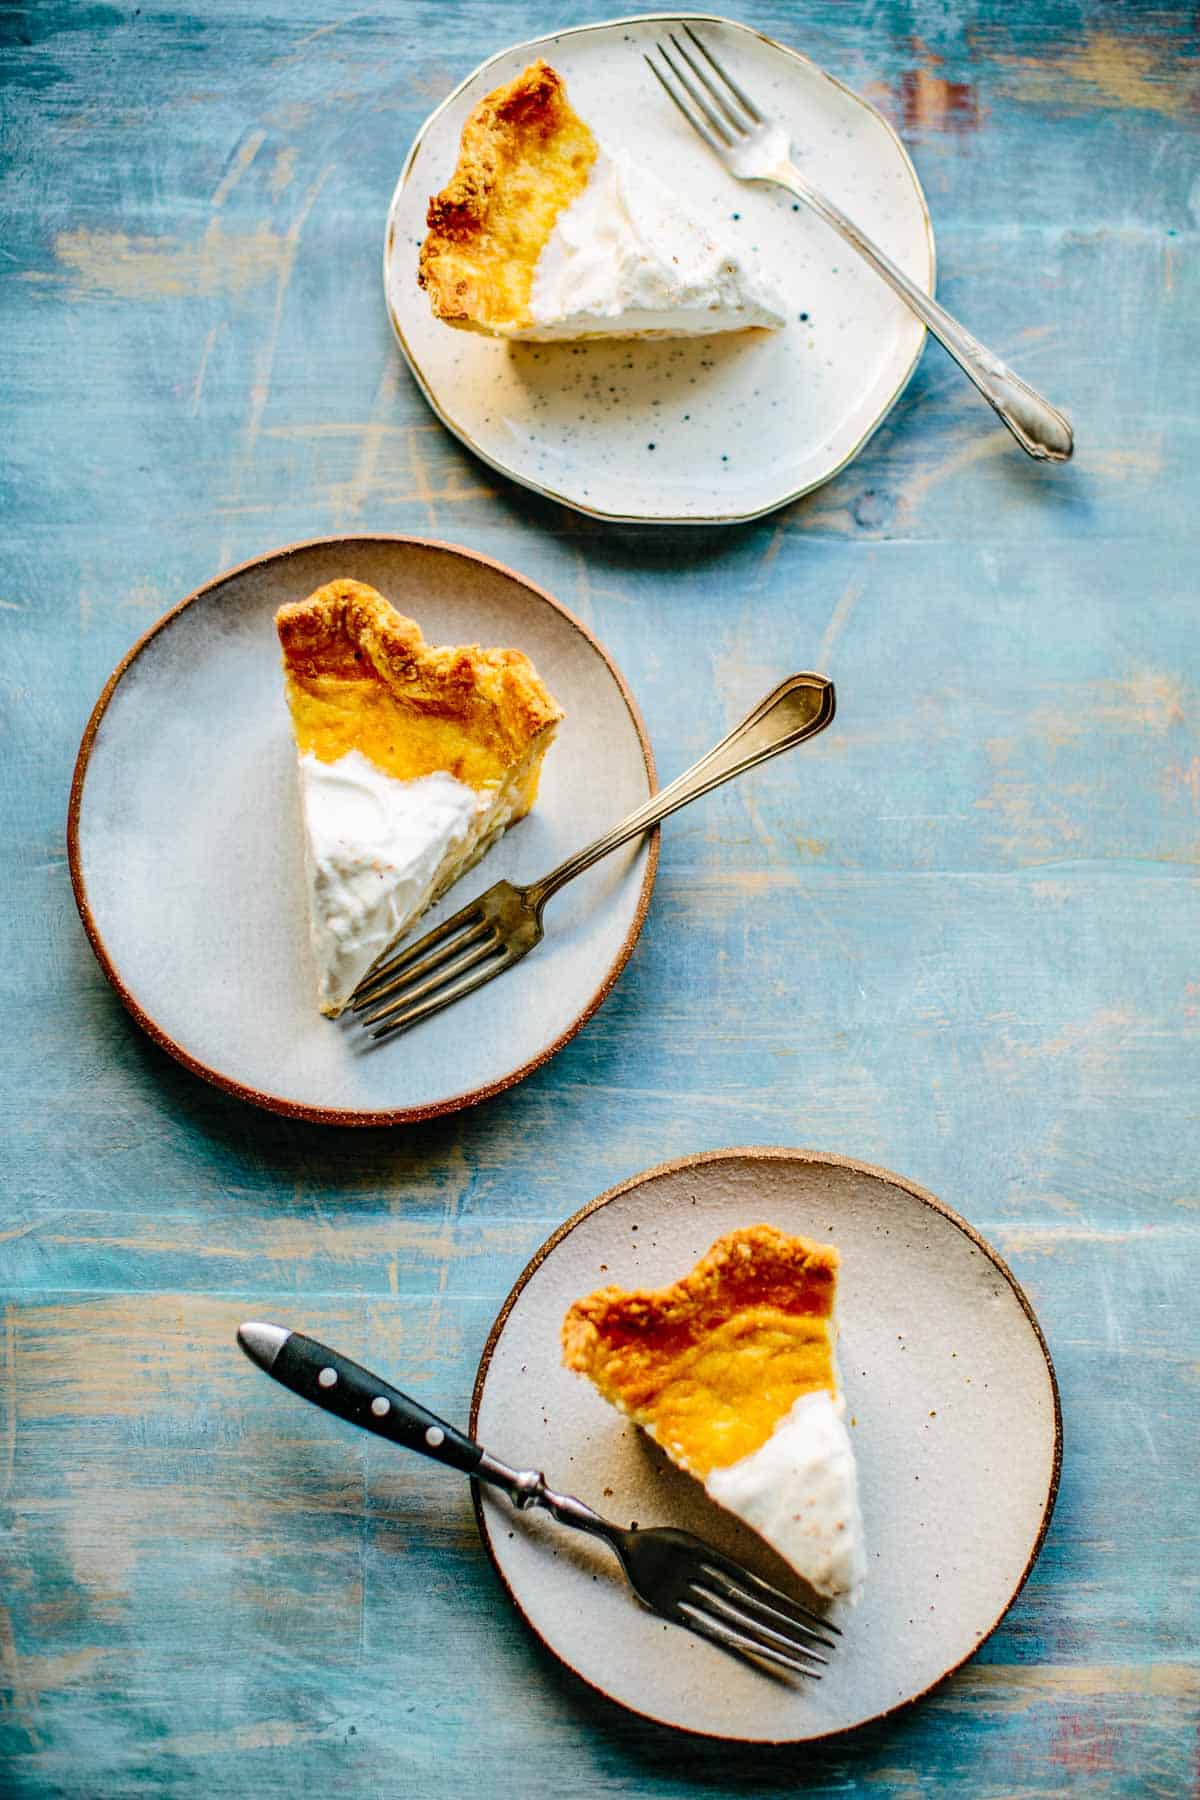 Overhead view of 3 white plates with slices of pie and a fork on each.